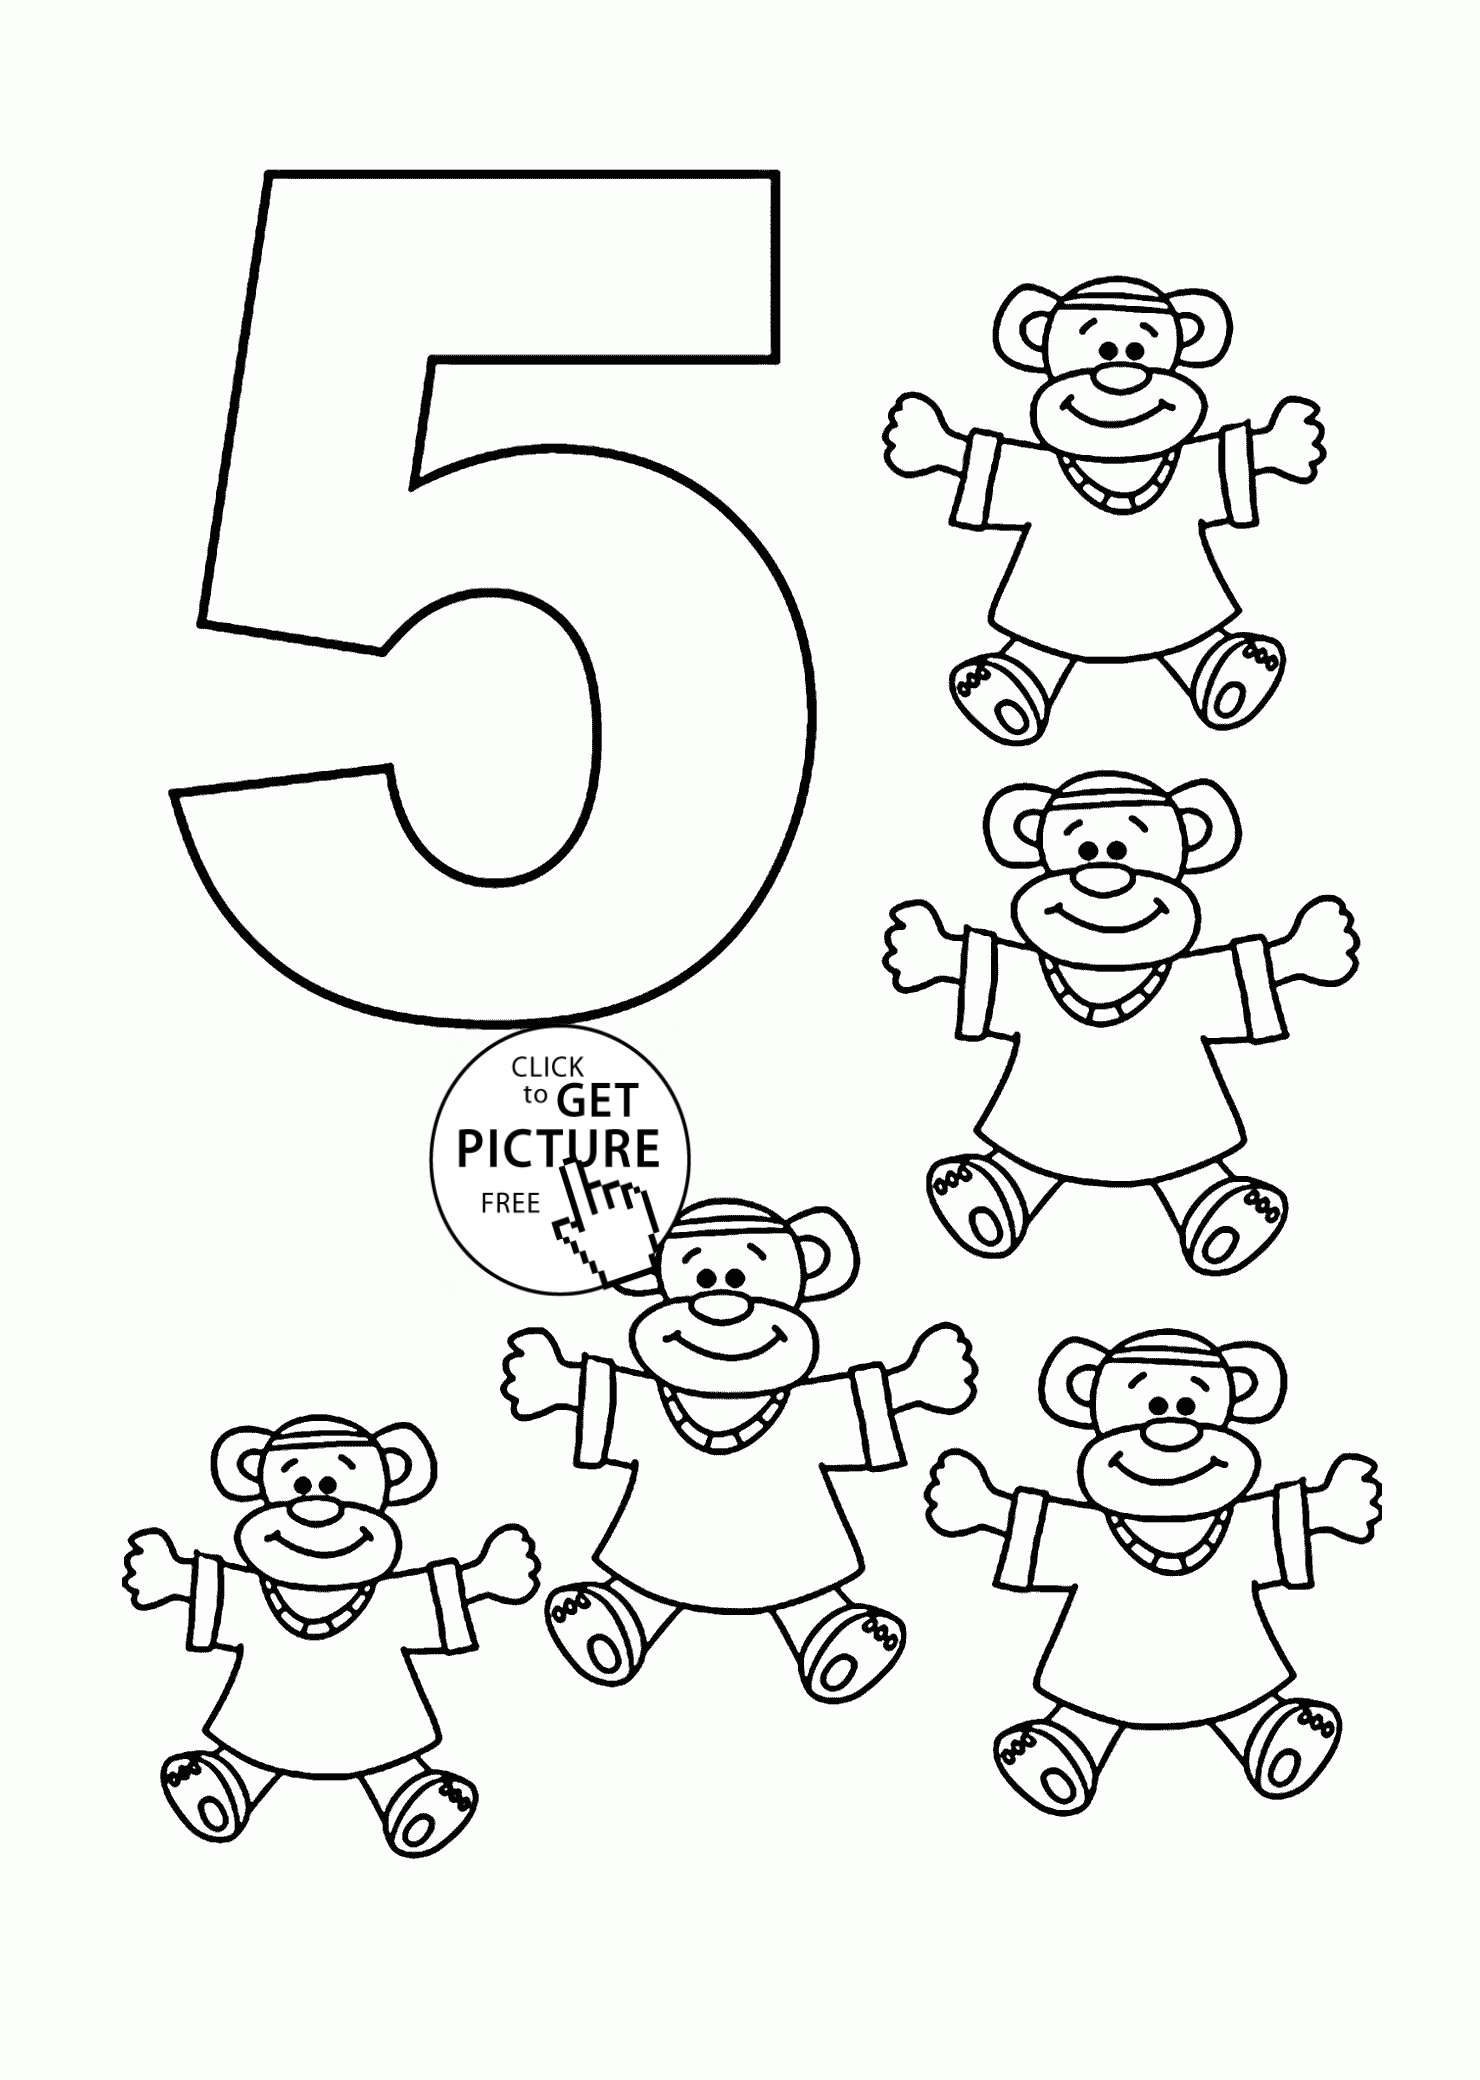 Number coloring pages for kids counting sheets printables free